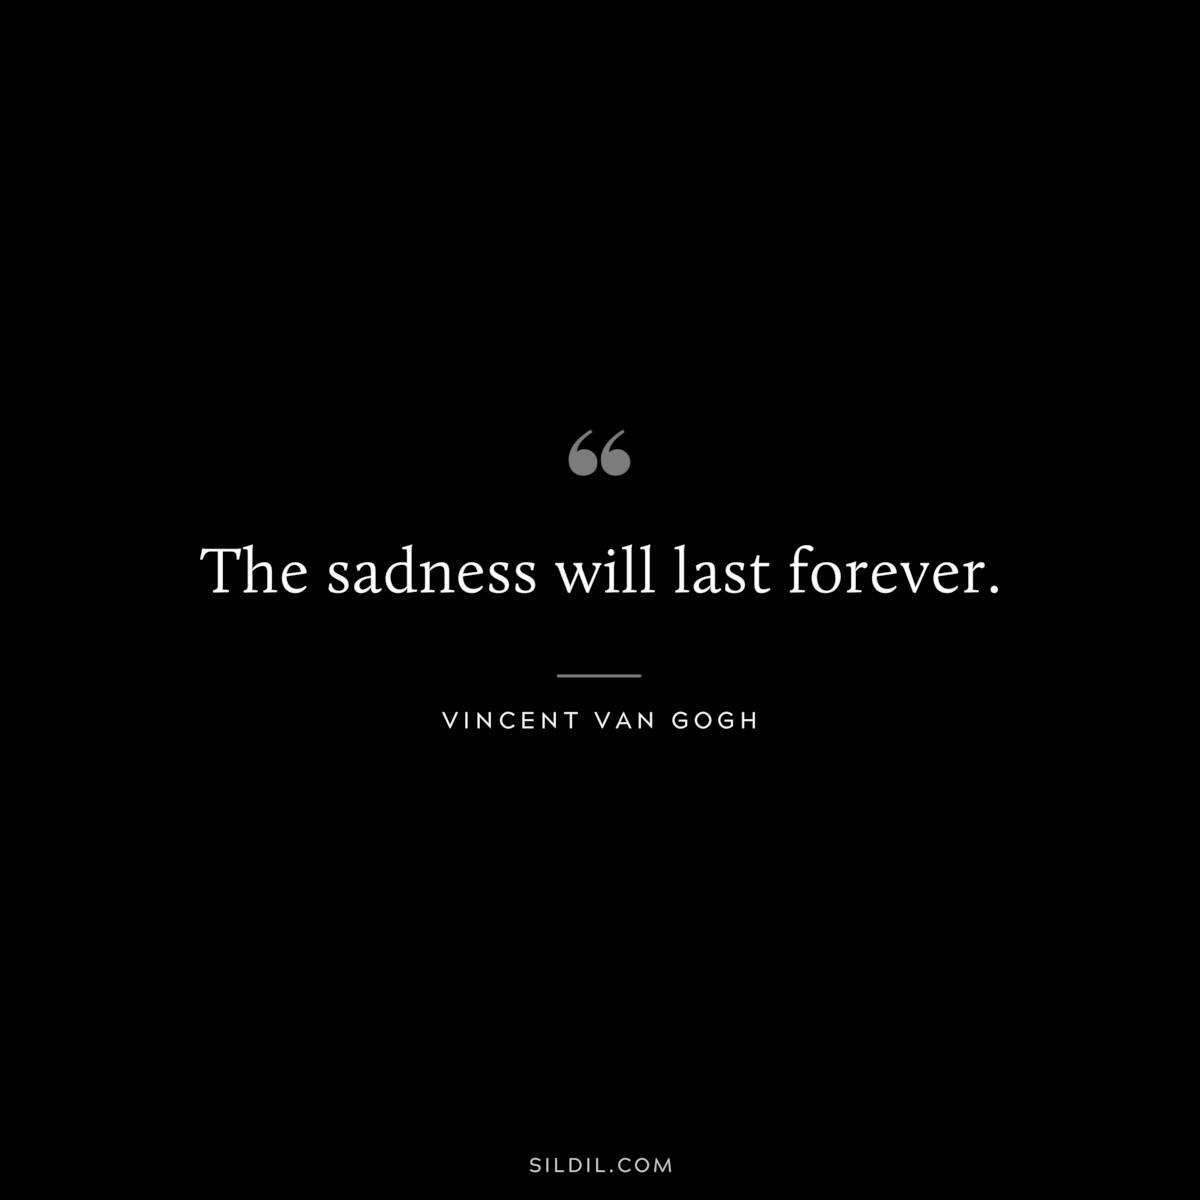 The sadness will last forever. ― Vincent van Gogh